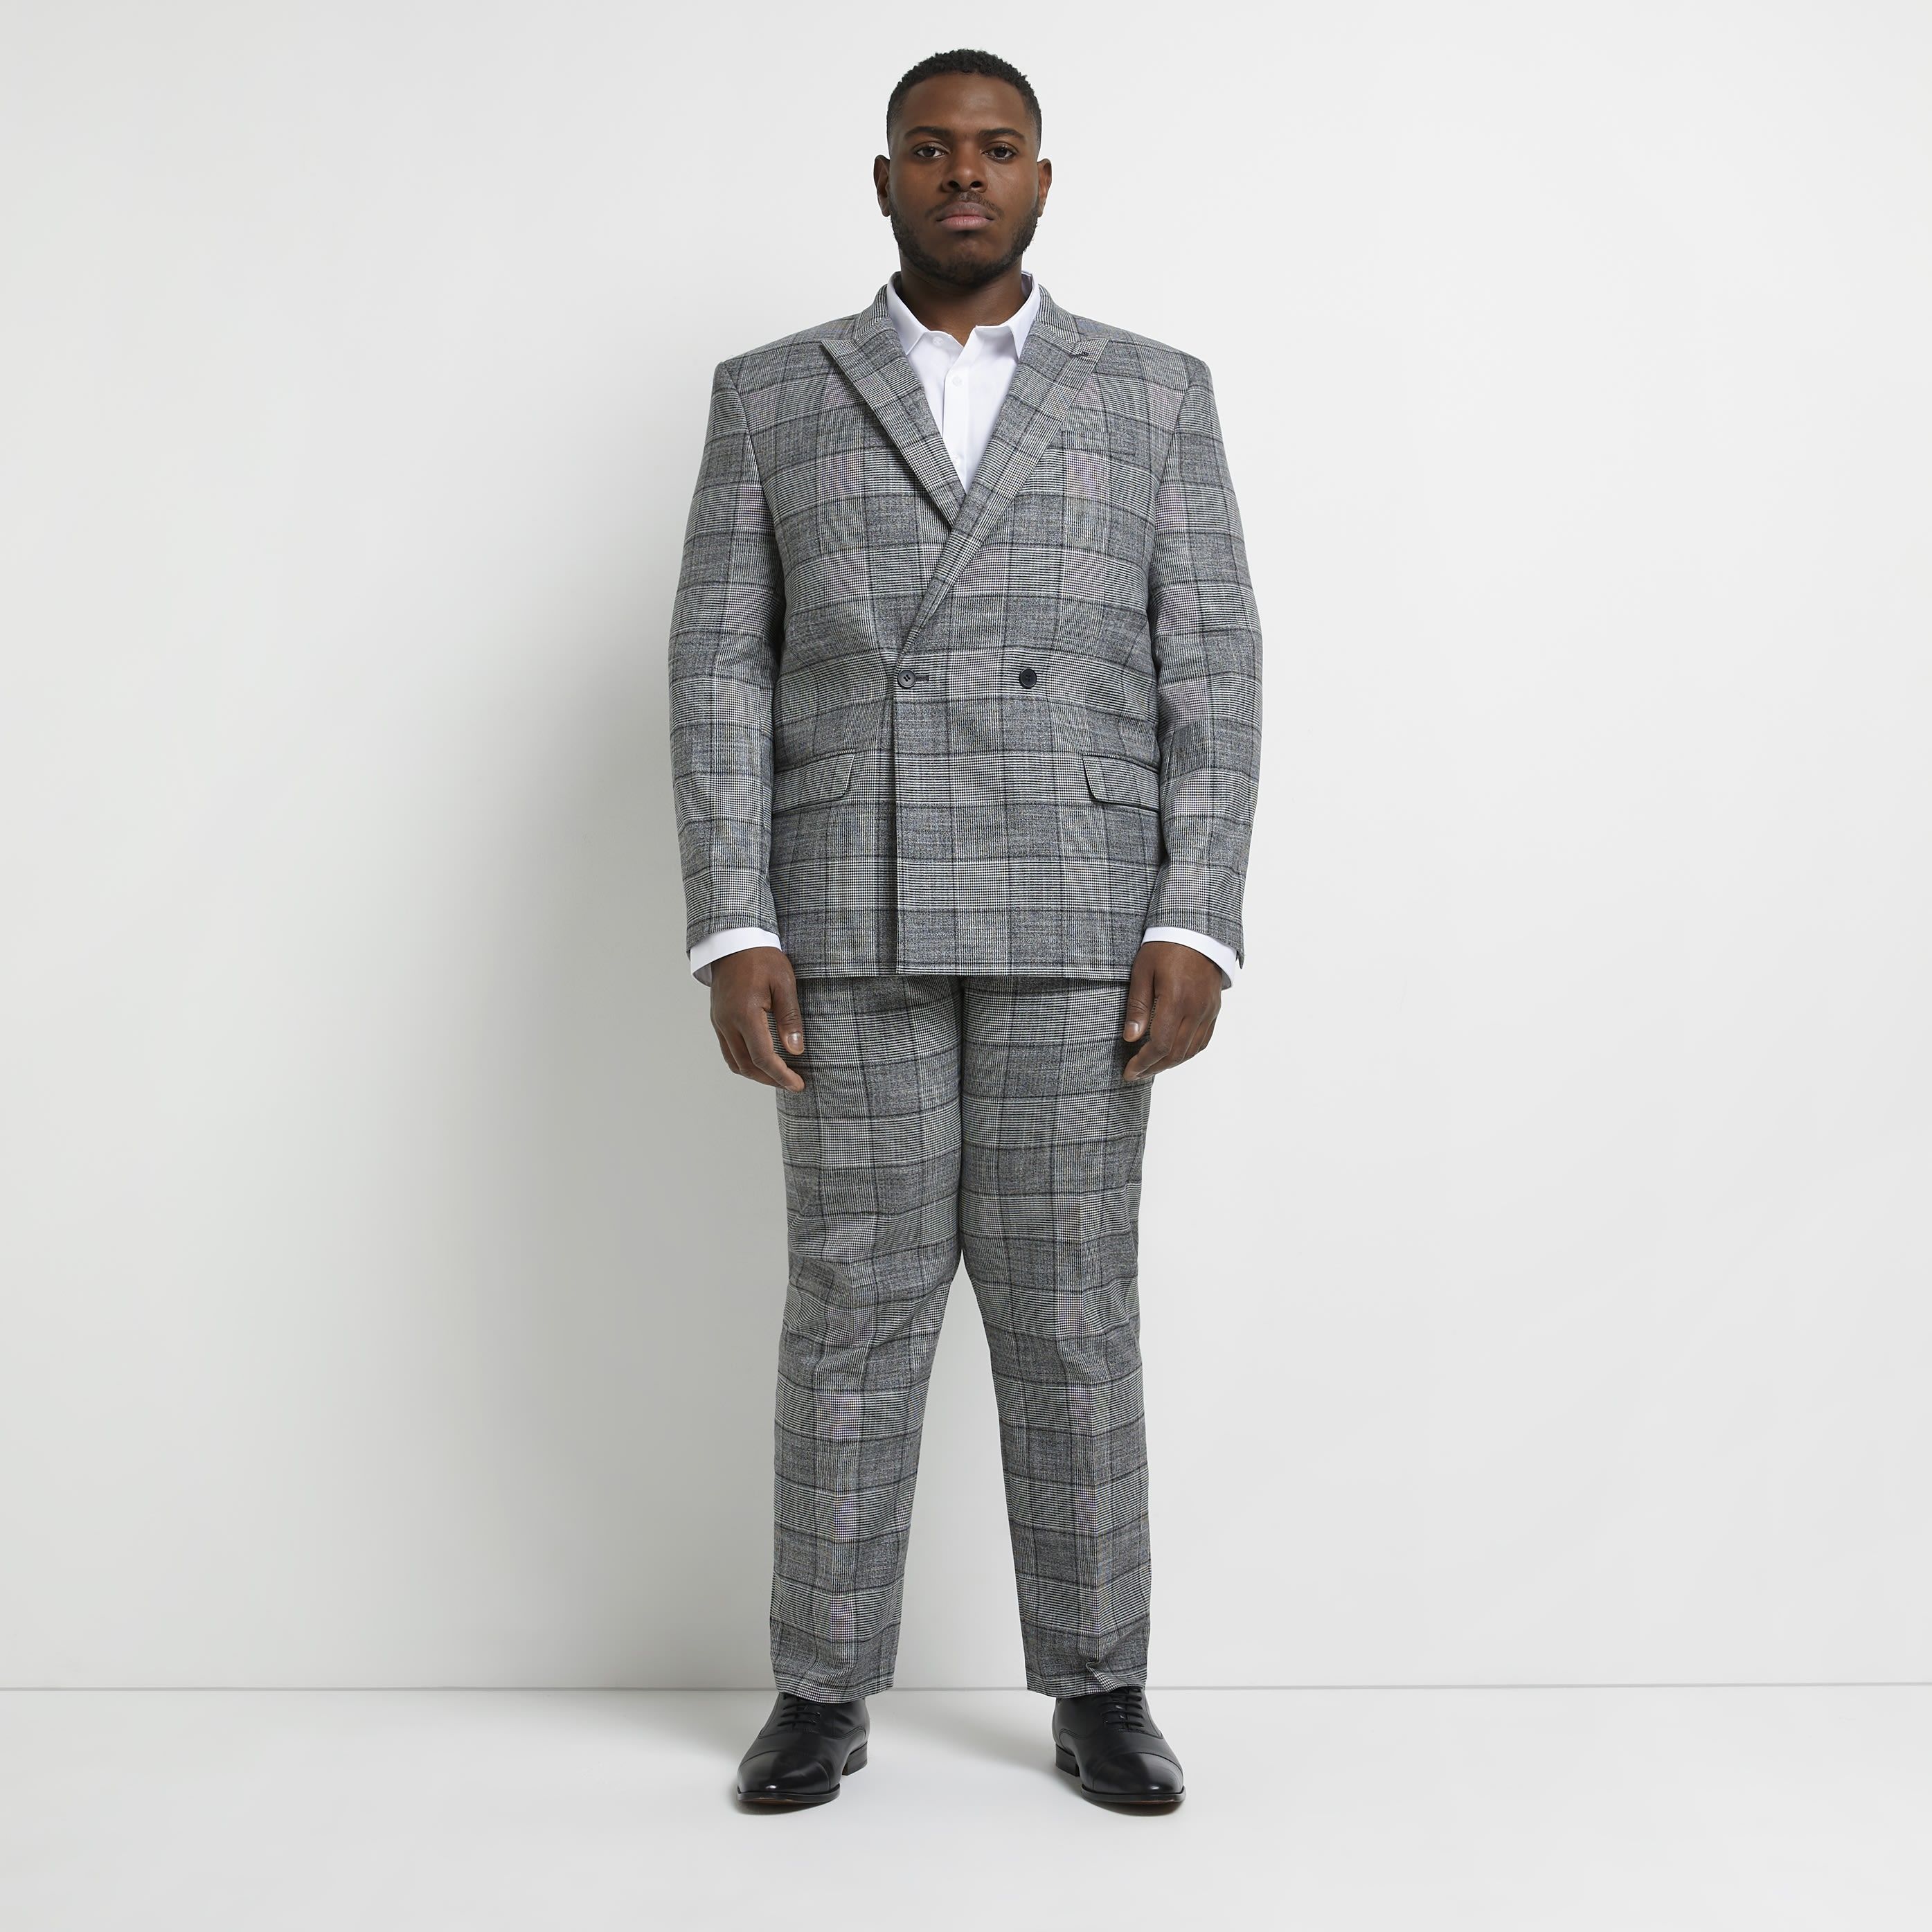 > Brand: River Island> Department: Men> Material: Polyester> Material Composition: 69% Polyester 30% Viscose 1% Elastane> Type: Suit Jacket> Style: 2 Piece> Size Type: Big & Tall> Fit: Slim> Jacket Lapel Style: Peak> Jacket Front Button Style: Two-Button> Pattern: Check> Occasion: Formal> Selection: Menswear> Season: AW21